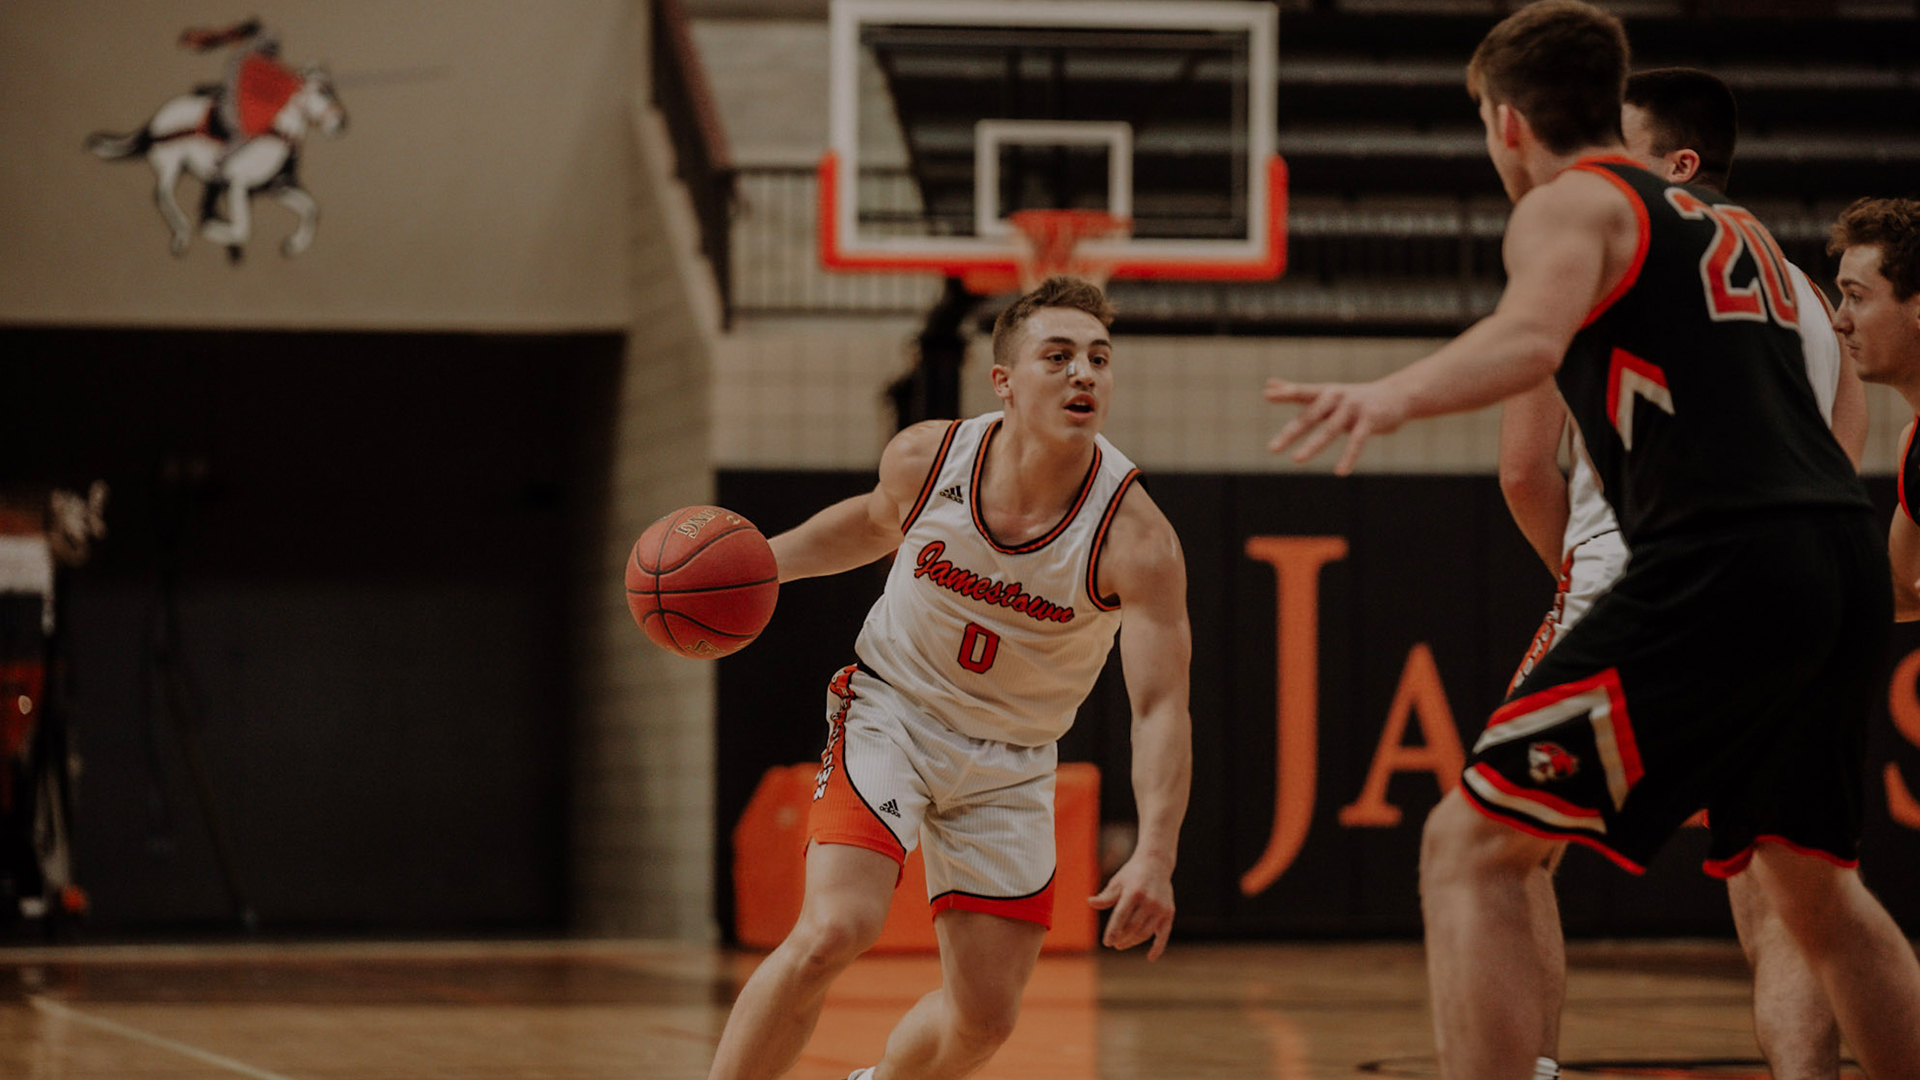 Kjos three-pointer at the buzzer wins it for Jimmies